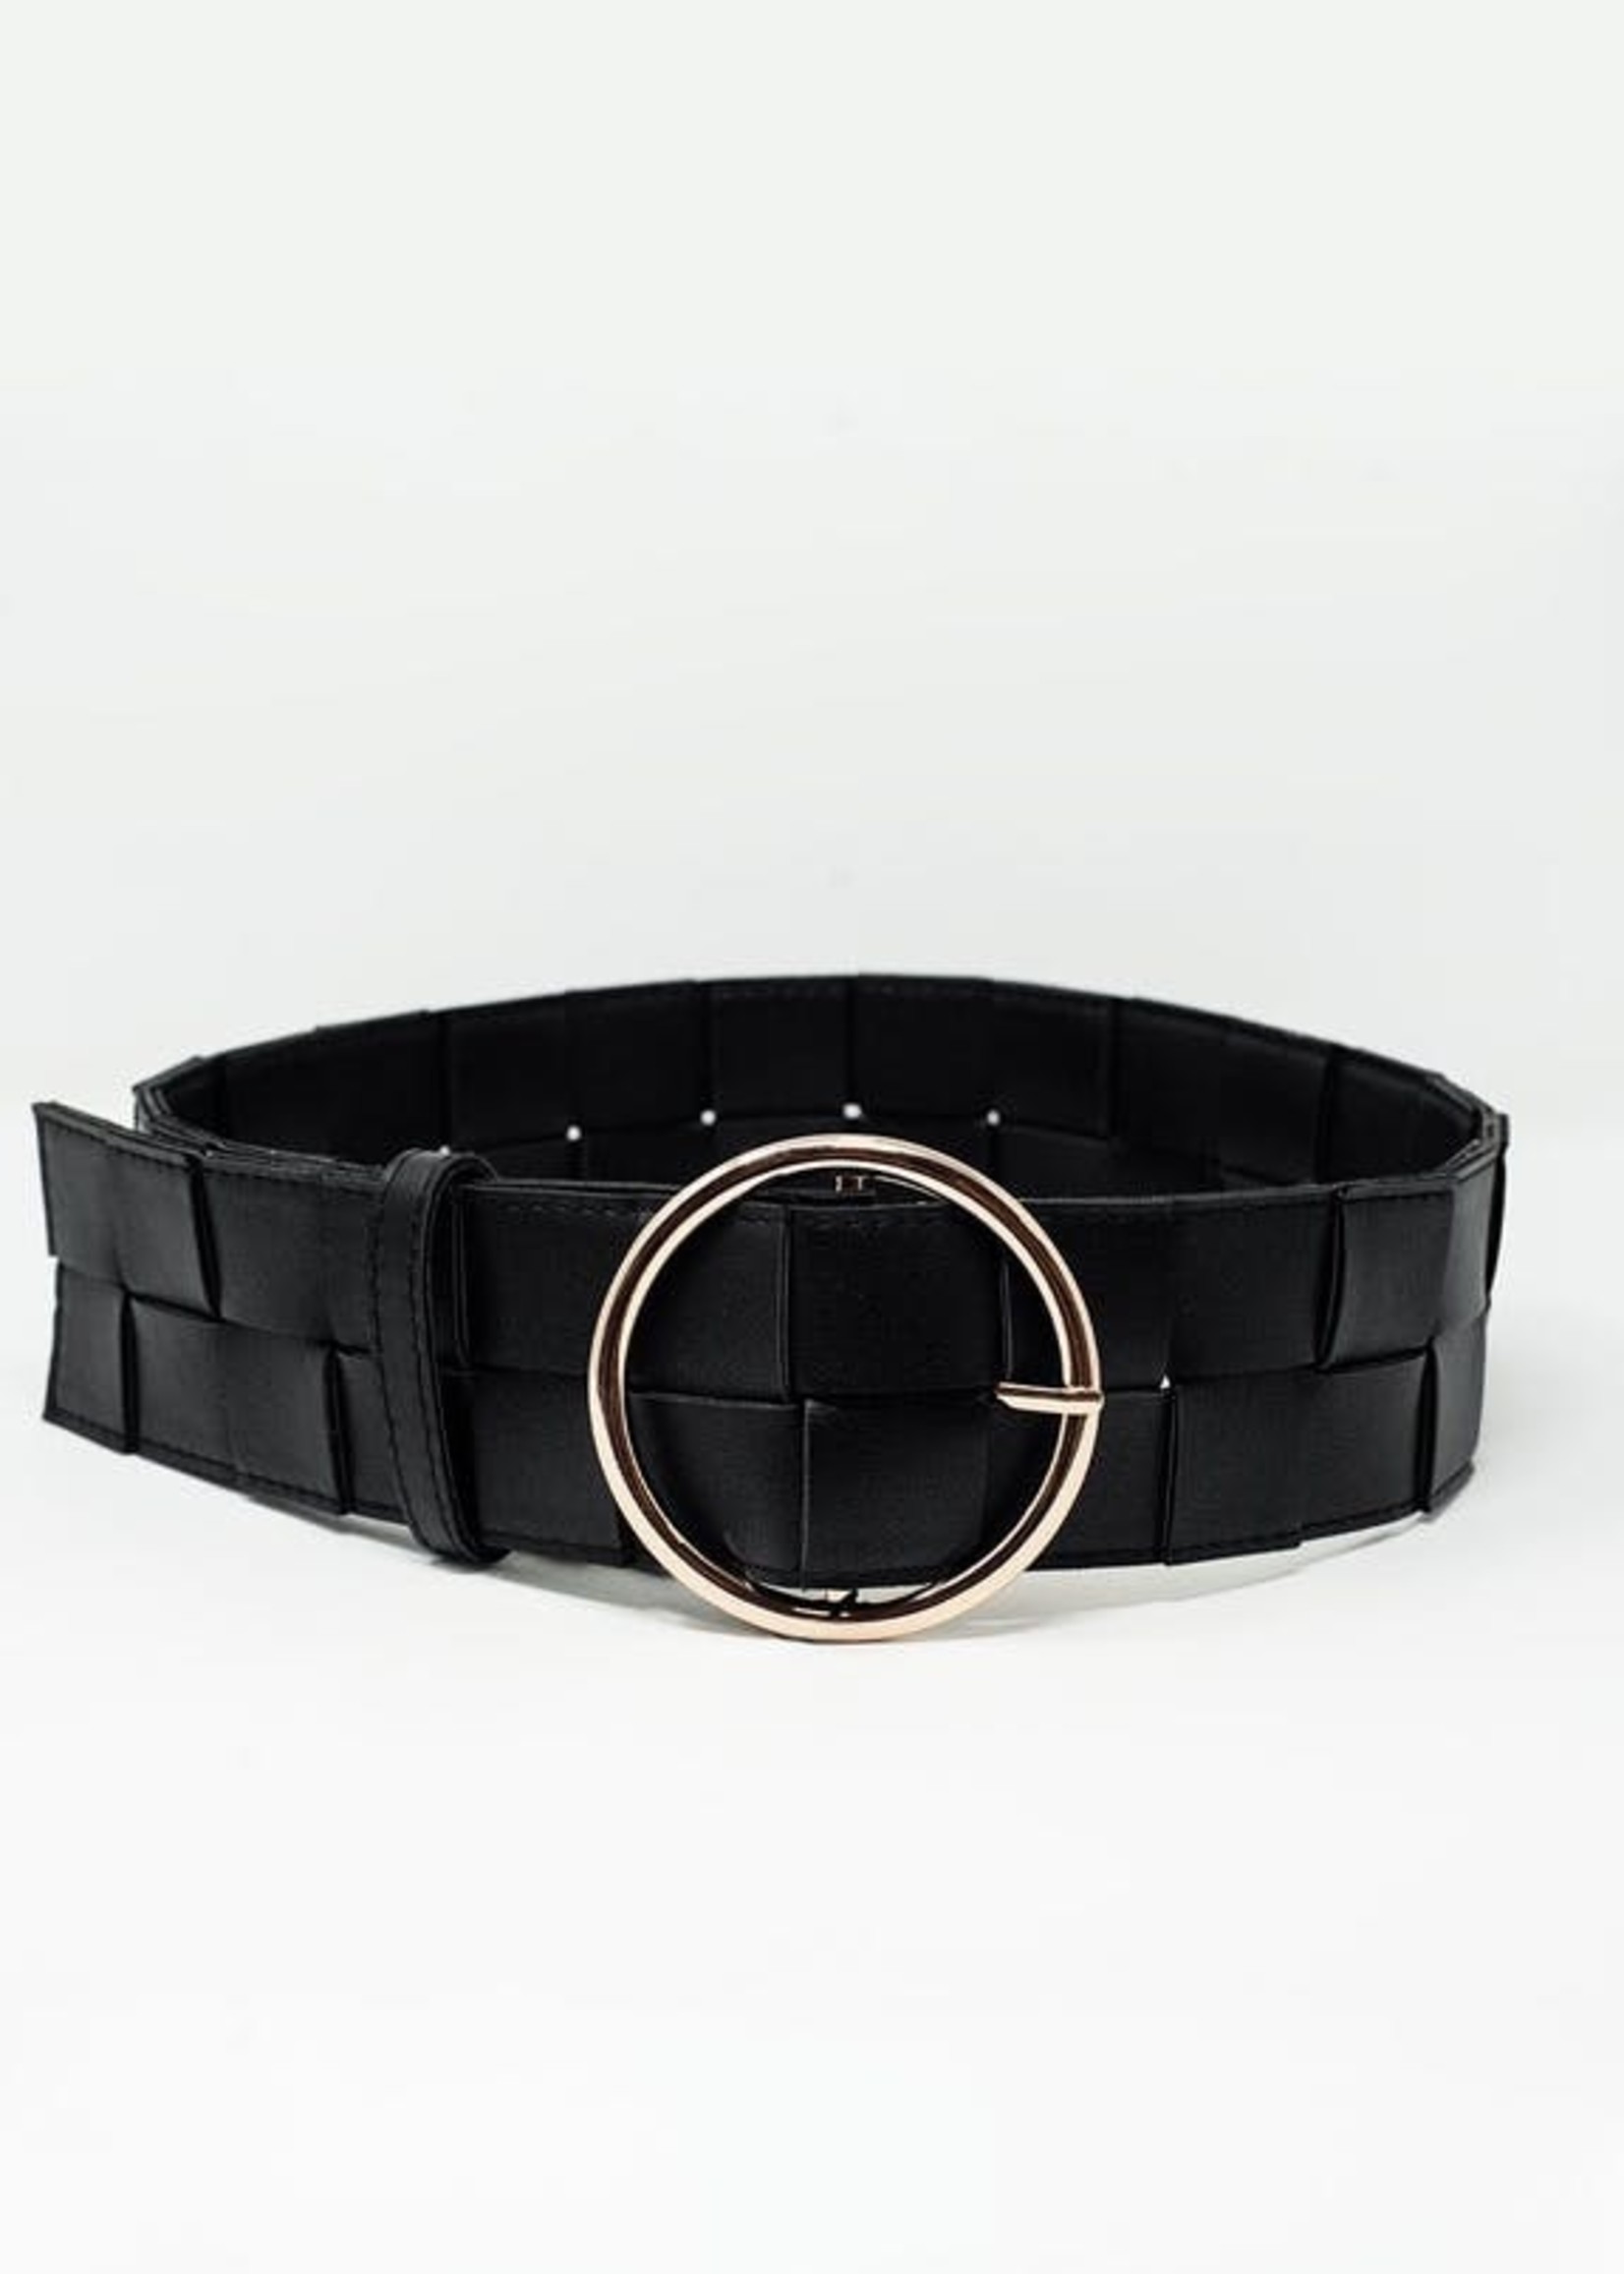 Q2 Belt with gold buckle in black